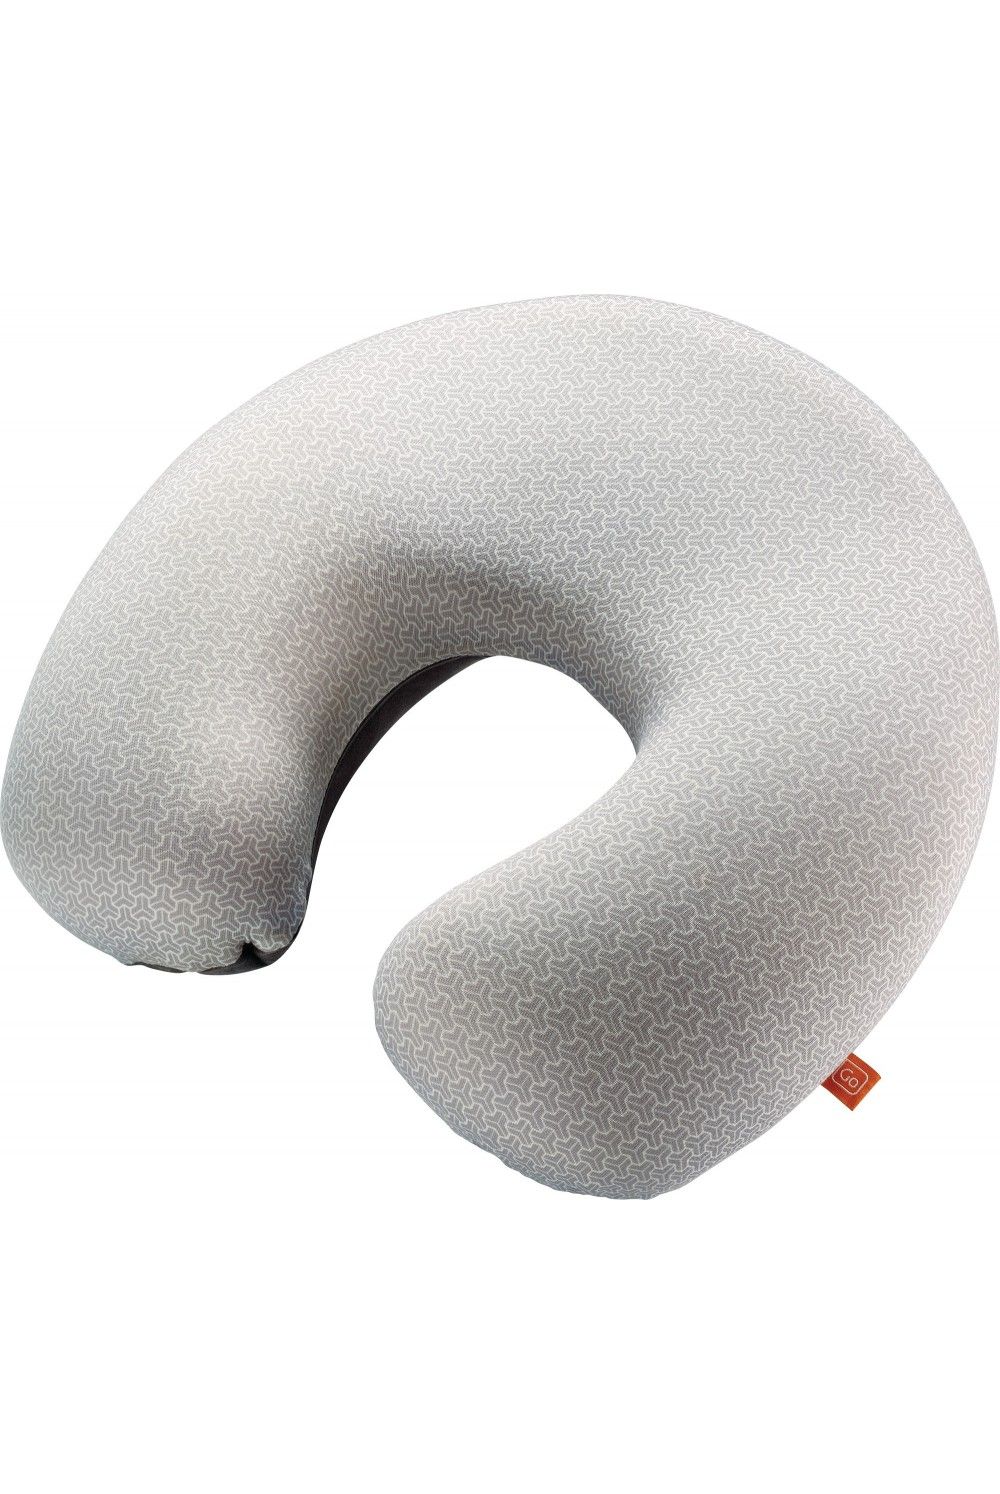 Go Travel inflatable memory foam neck pillow small stowable